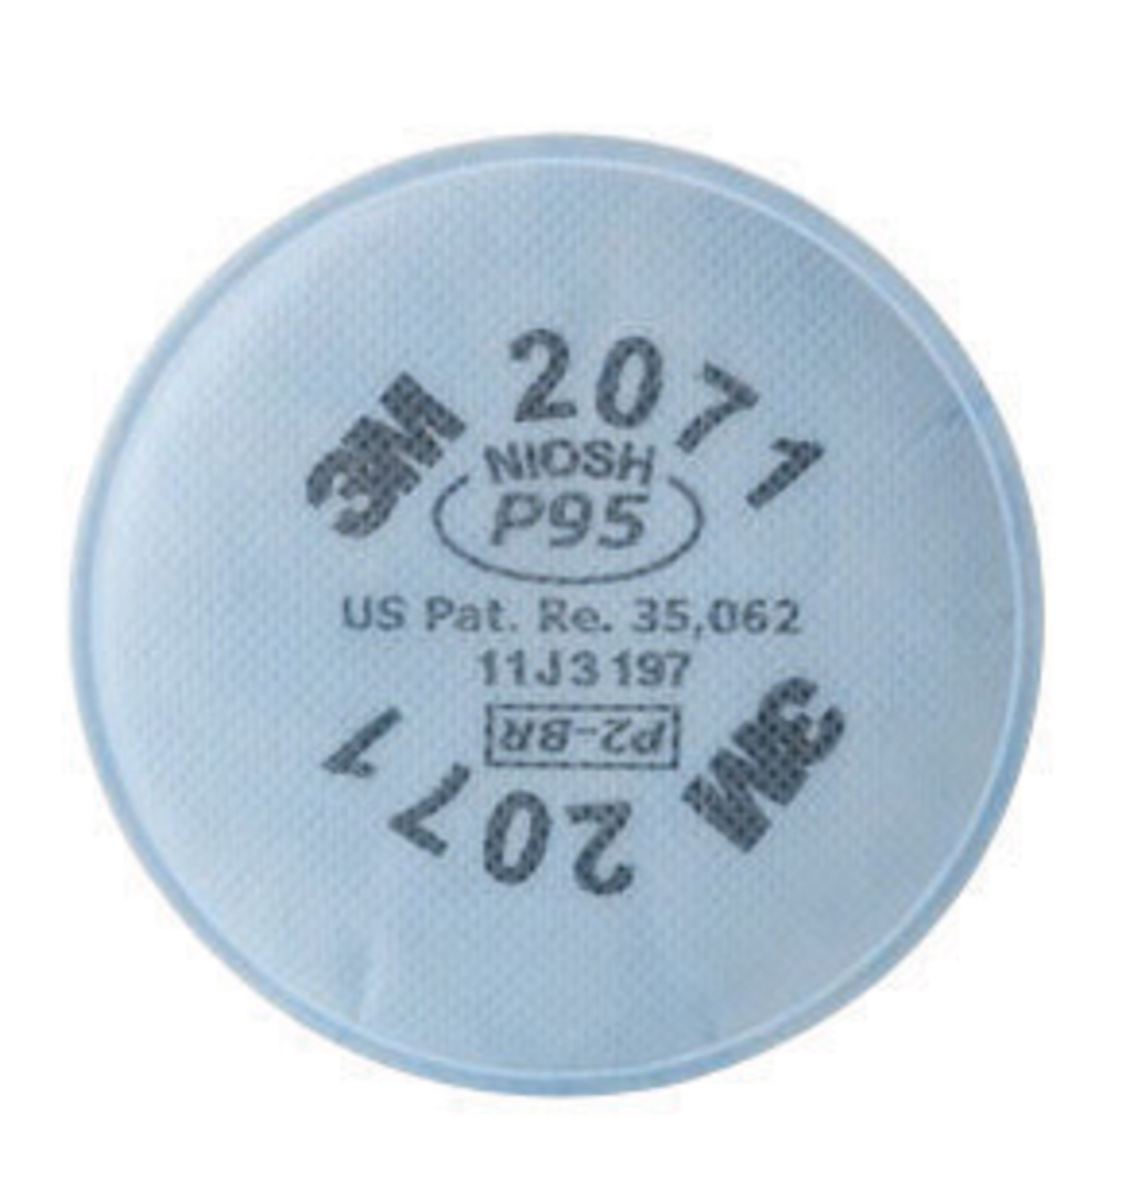 3M™ 2071 P95 Particulate Filter (Availability restrictions apply.)